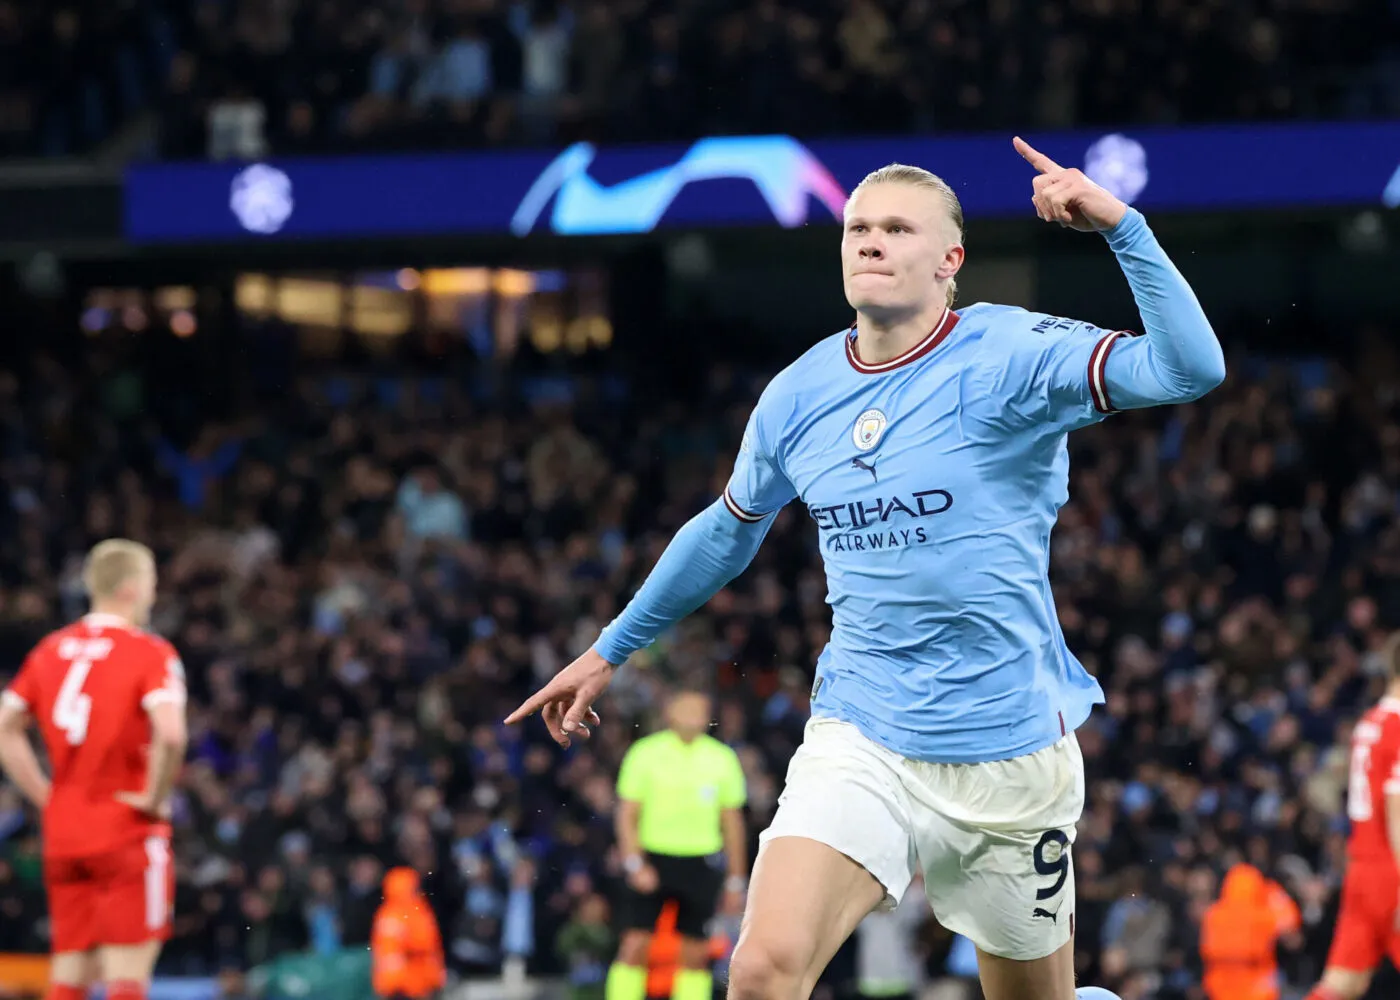 11th April 2023; Etihad Stadium, Manchester, England; Champions League Football, Quarter Final, First Leg, Manchester City versus Bayern Munich; Erling Haaland of Manchester City celebrates after scoring his side's third goal after 76 minutes - Photo by Icon sport